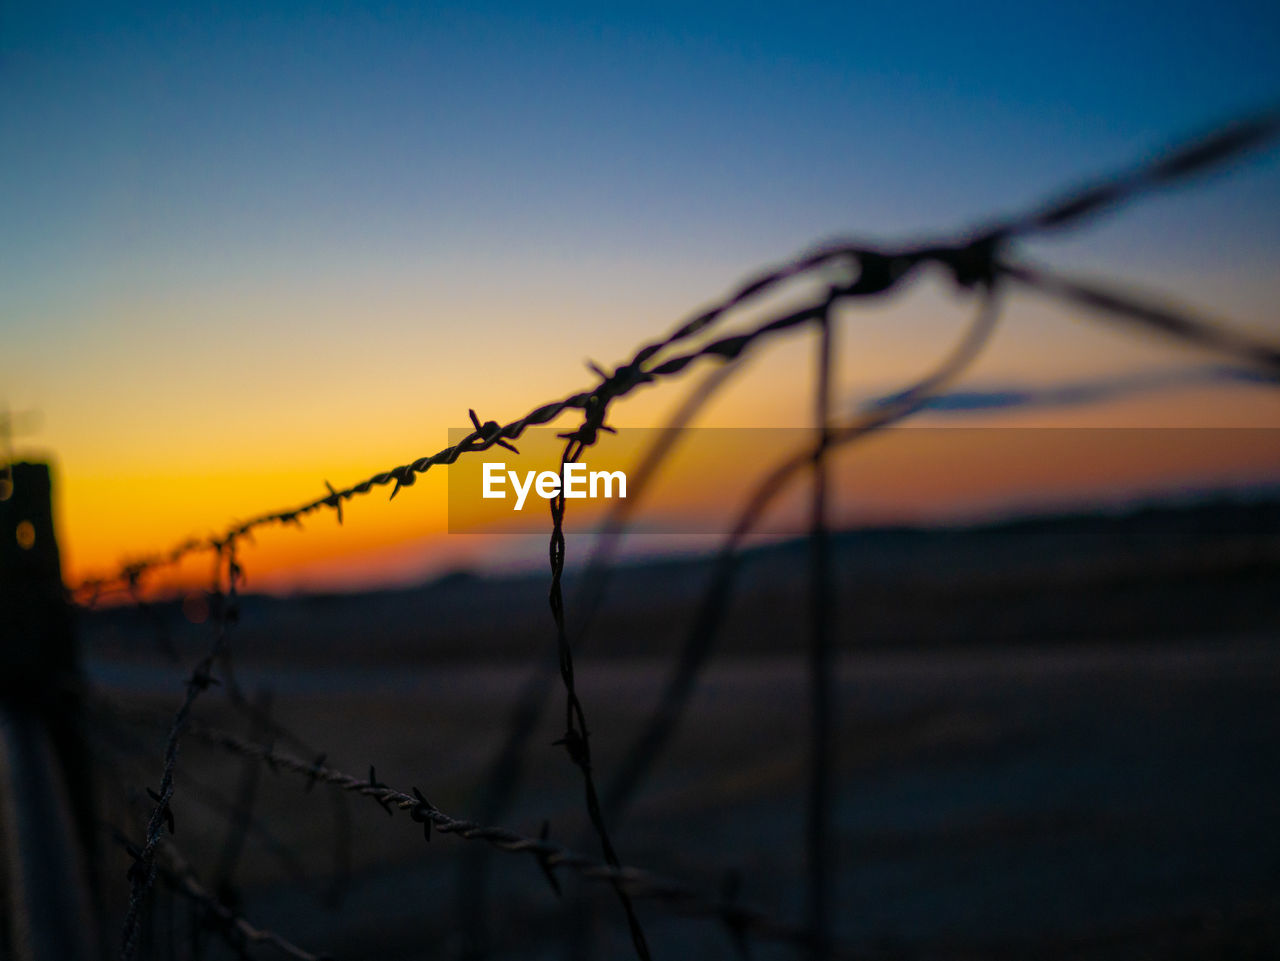 CLOSE-UP OF BARBED WIRE FENCE DURING SUNSET